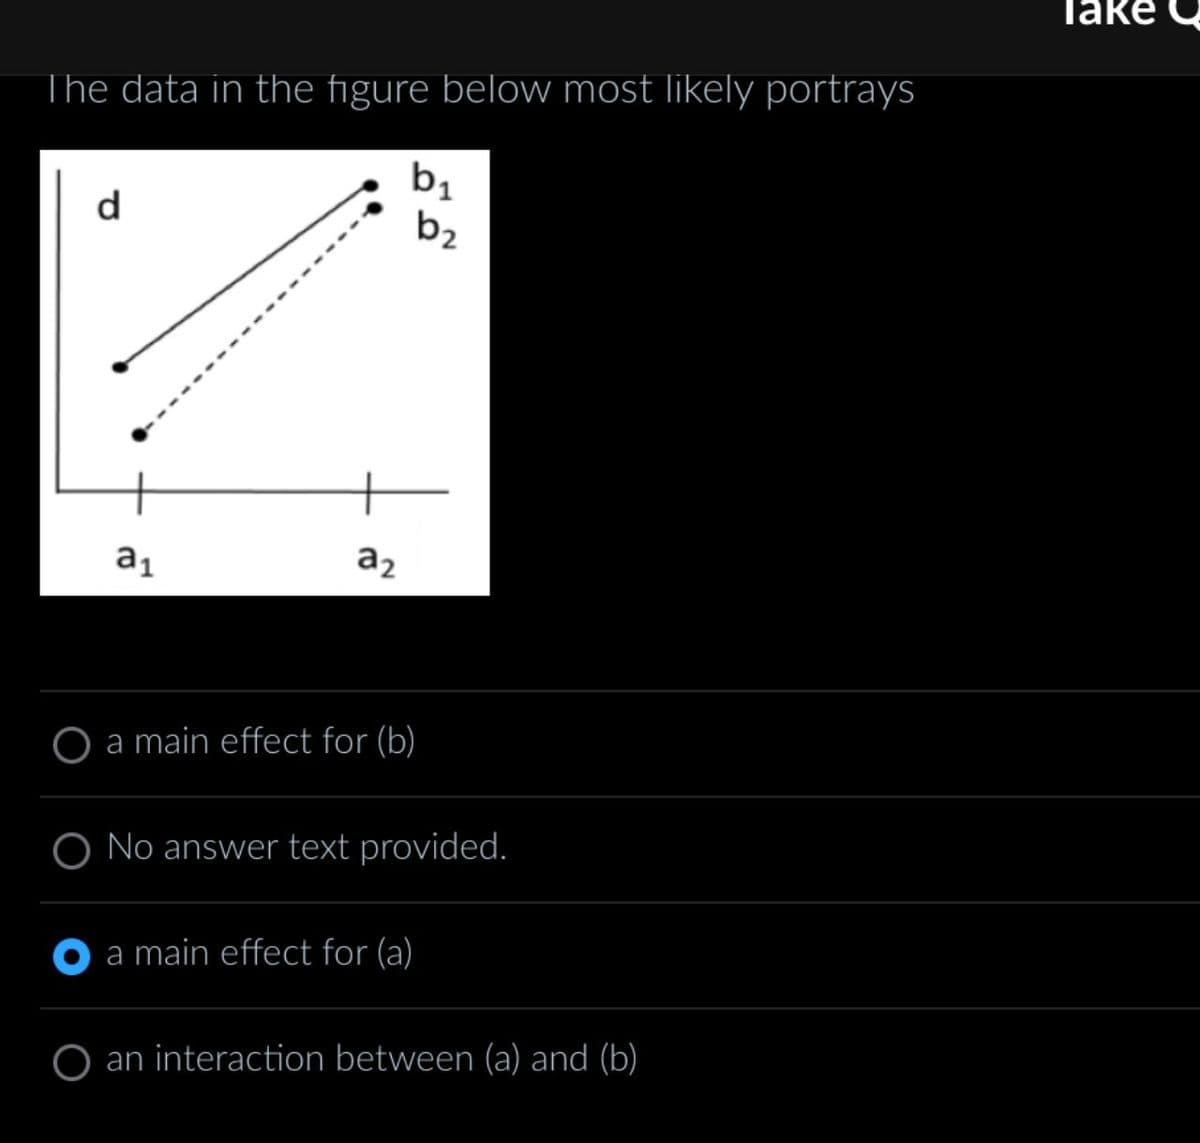 The data in the figure below most likely portrays
d
b₁
b2
a1
a2
O a main effect for (b)
No answer text provided.
a main effect for (a)
O an interaction between (a) and (b)
таке